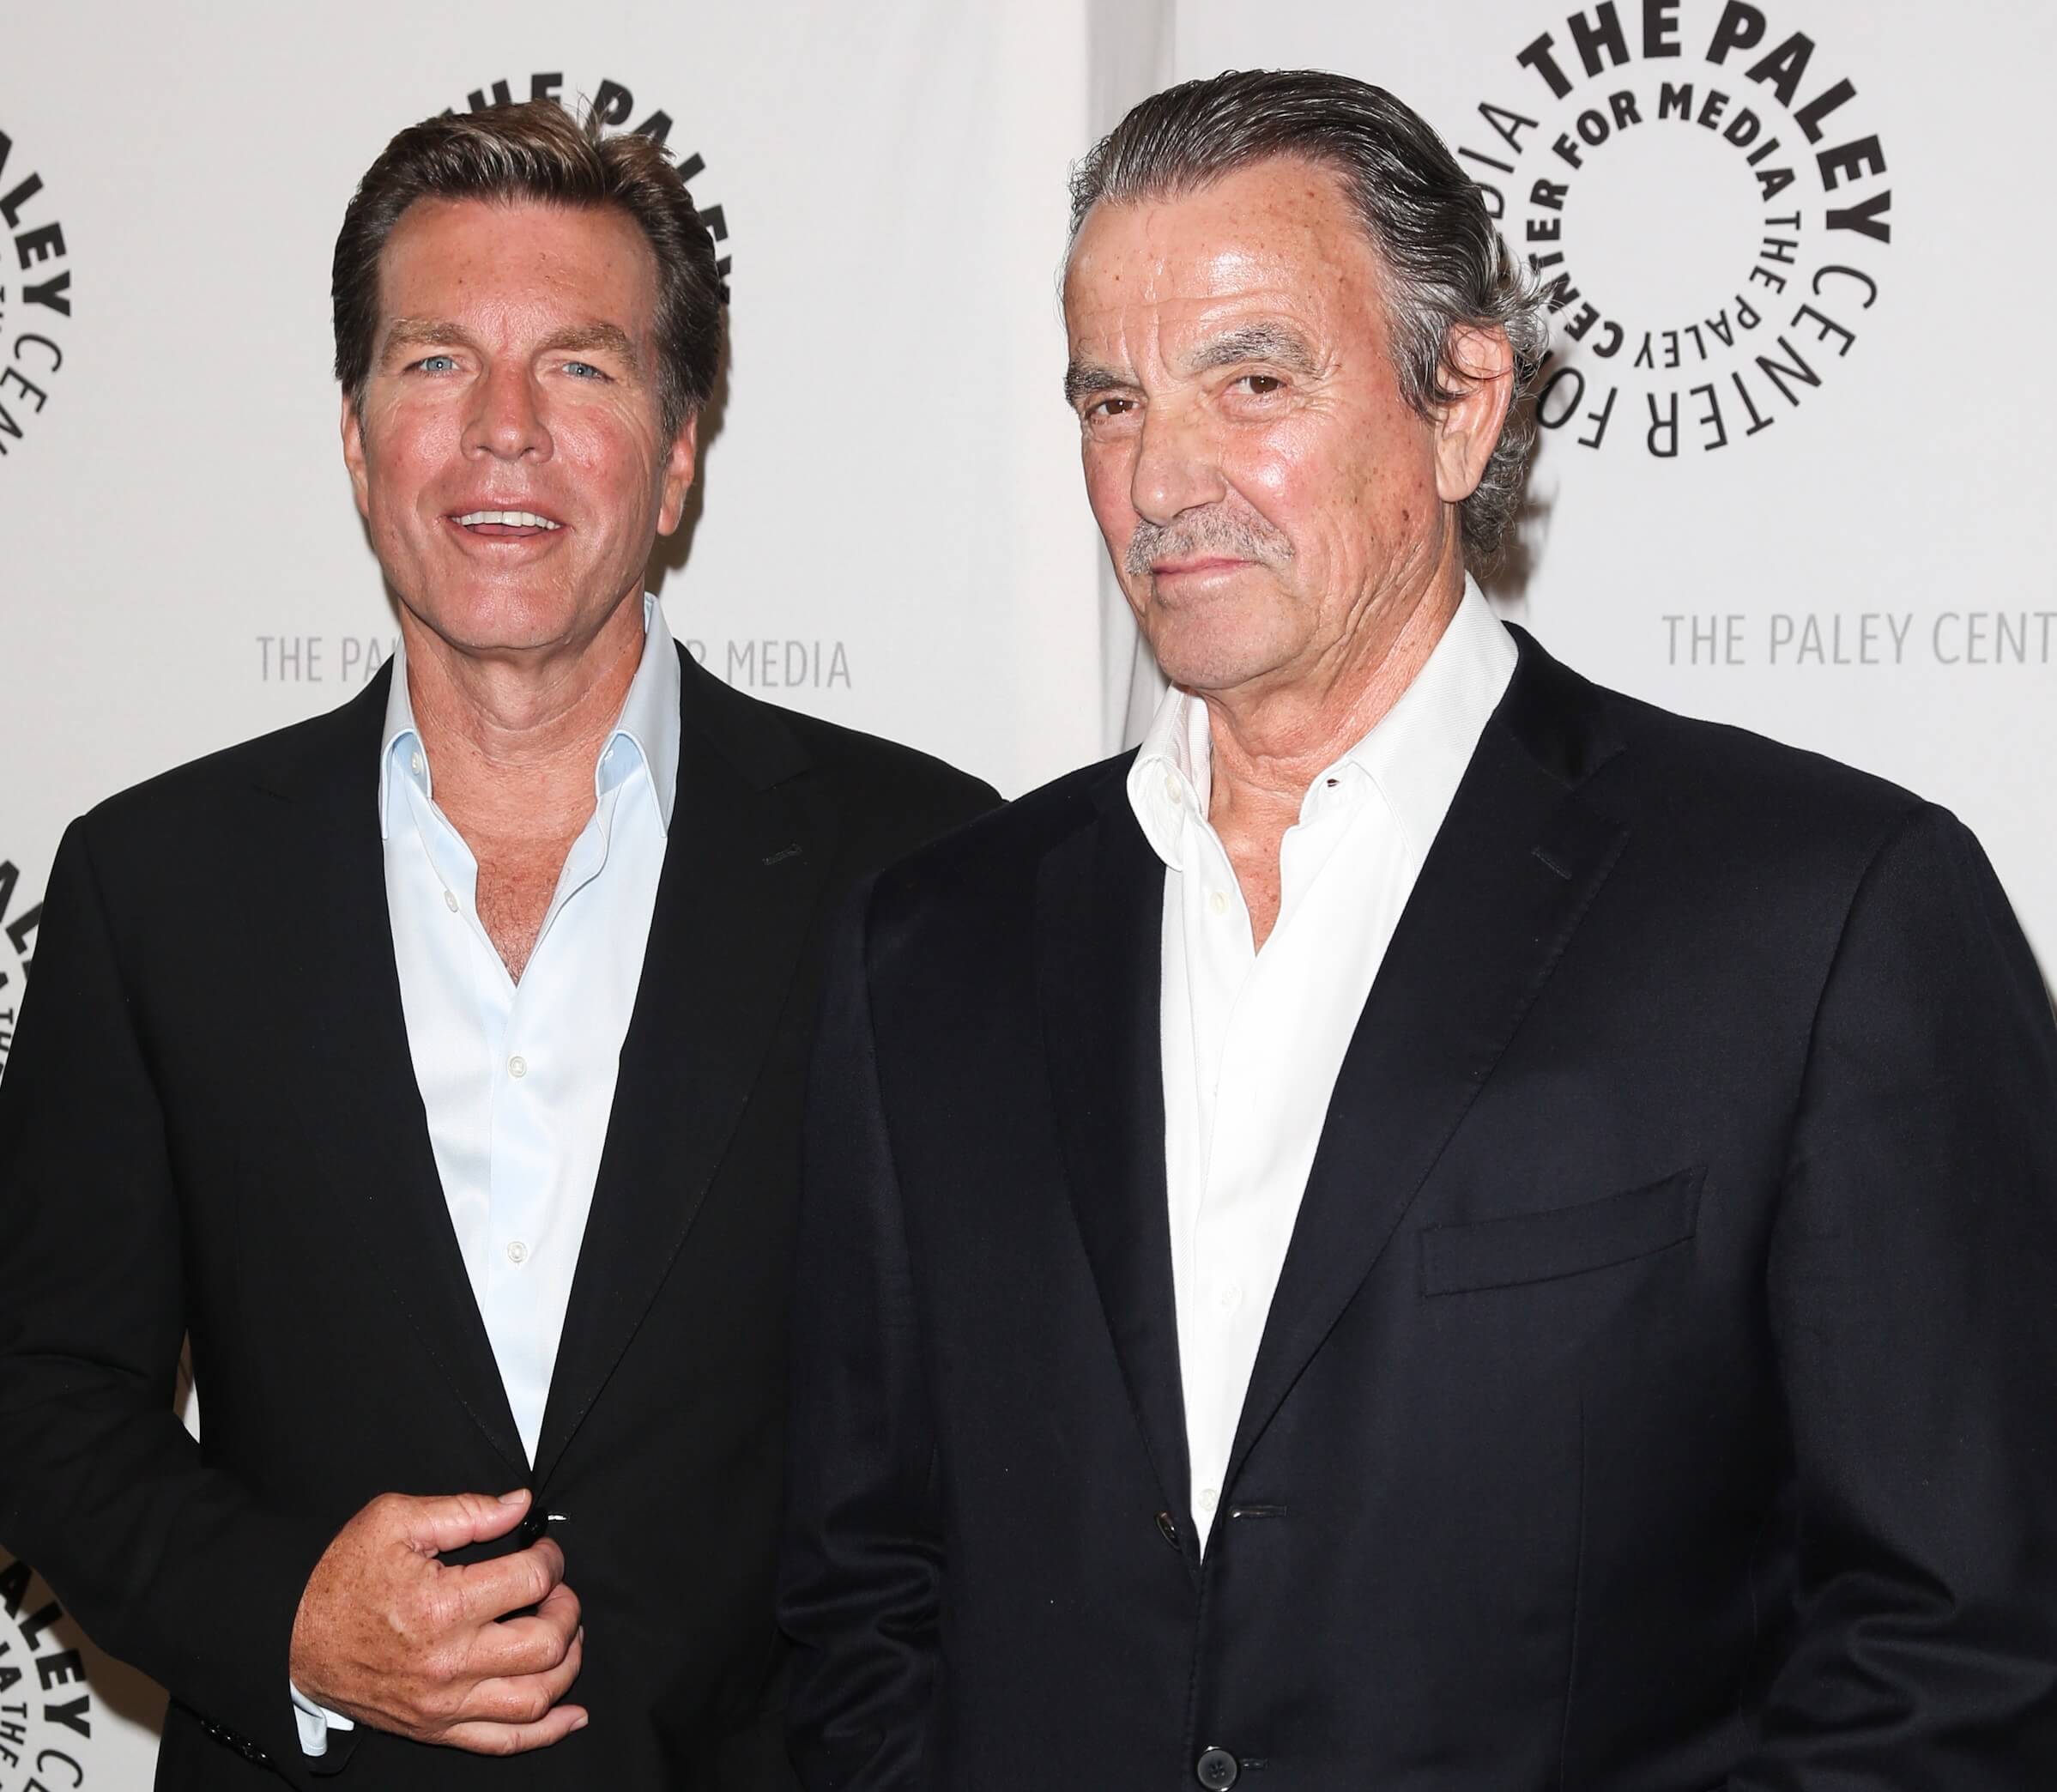 'The Young and the Restless' stars Peter Bergman and Eric Braeden dressed in black suits; posing together on the red carpet.